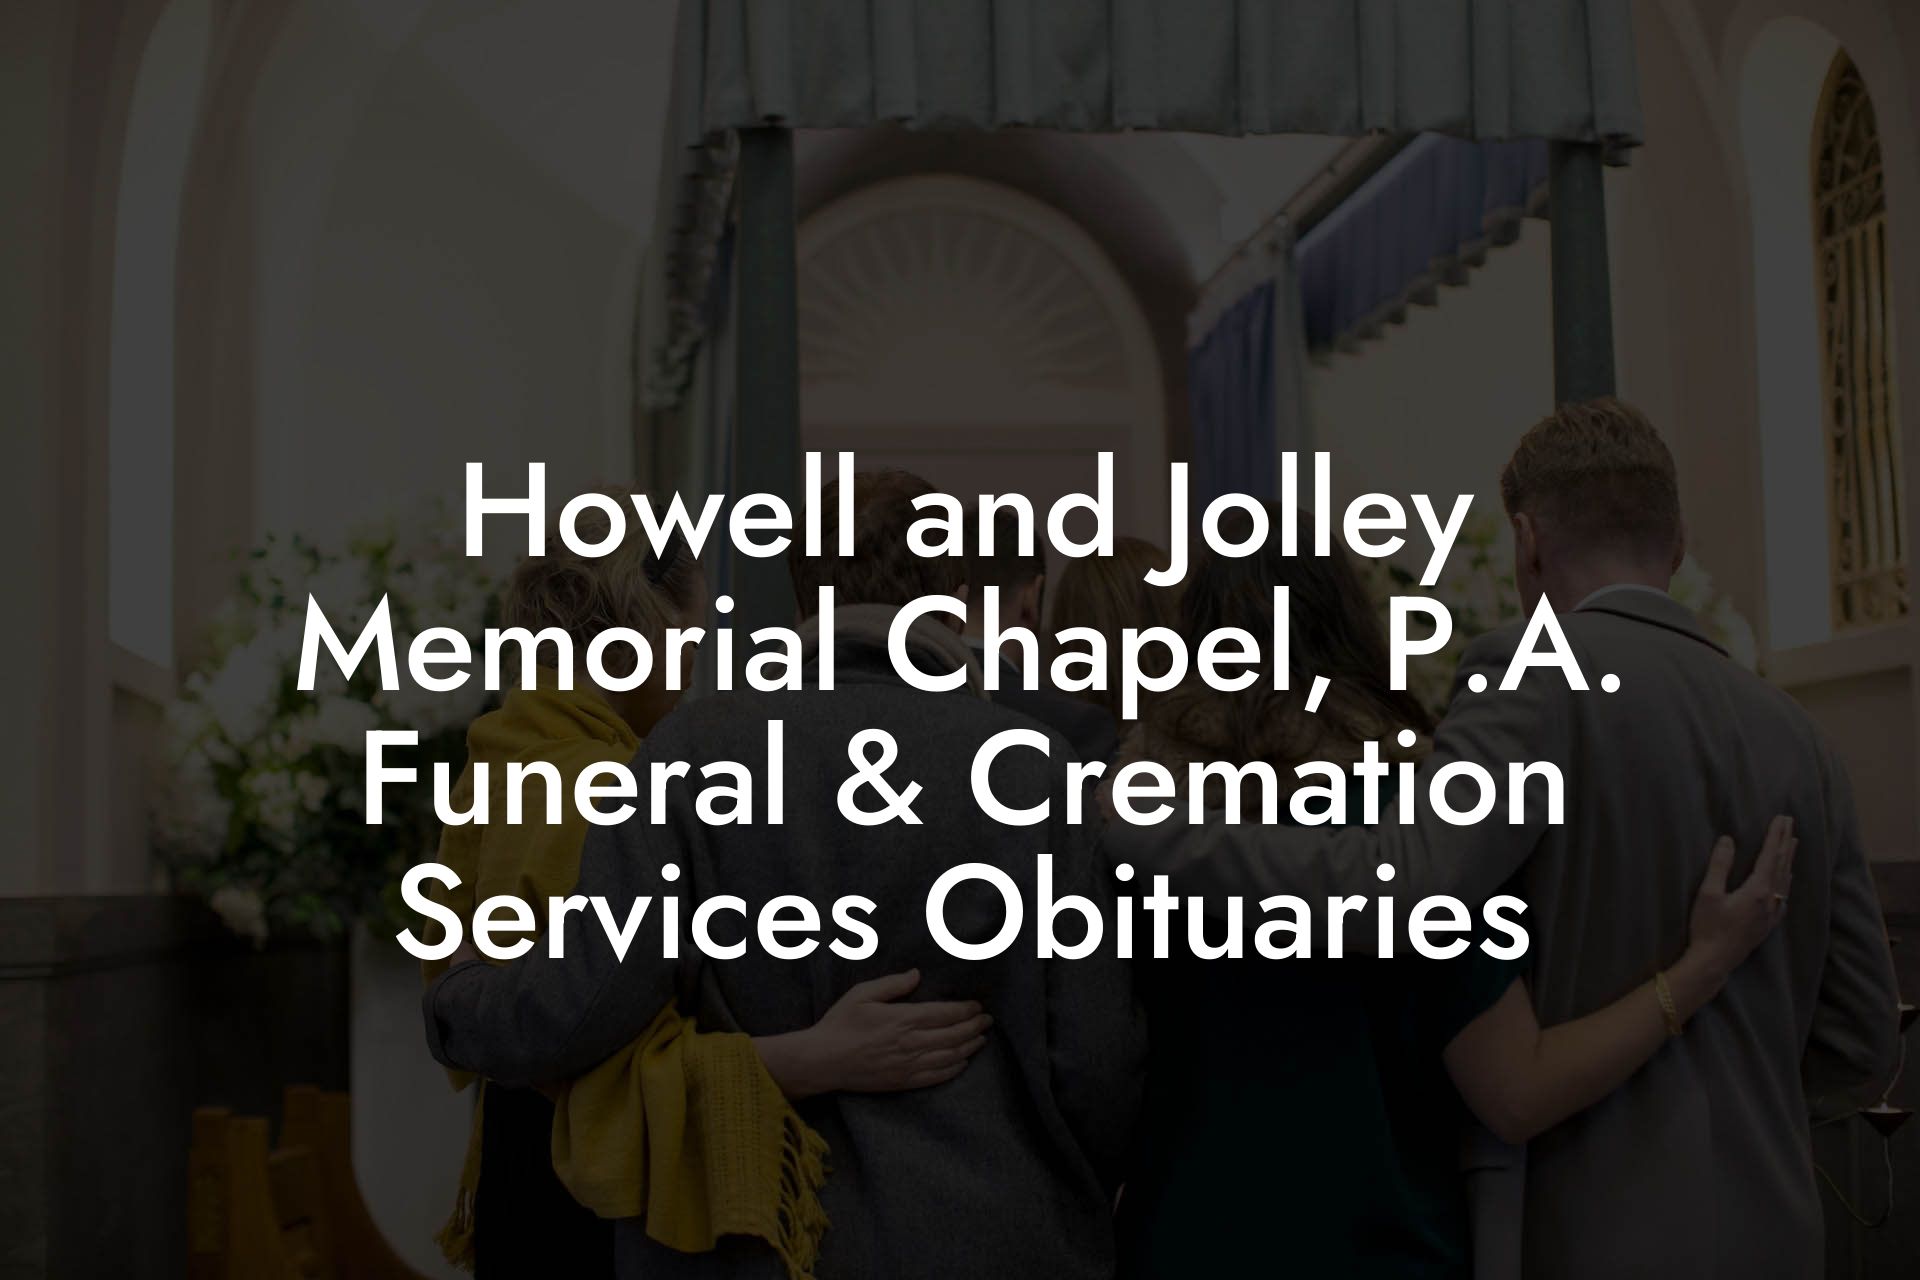 Howell and Jolley Memorial Chapel, P.A. Funeral & Cremation Services Obituaries